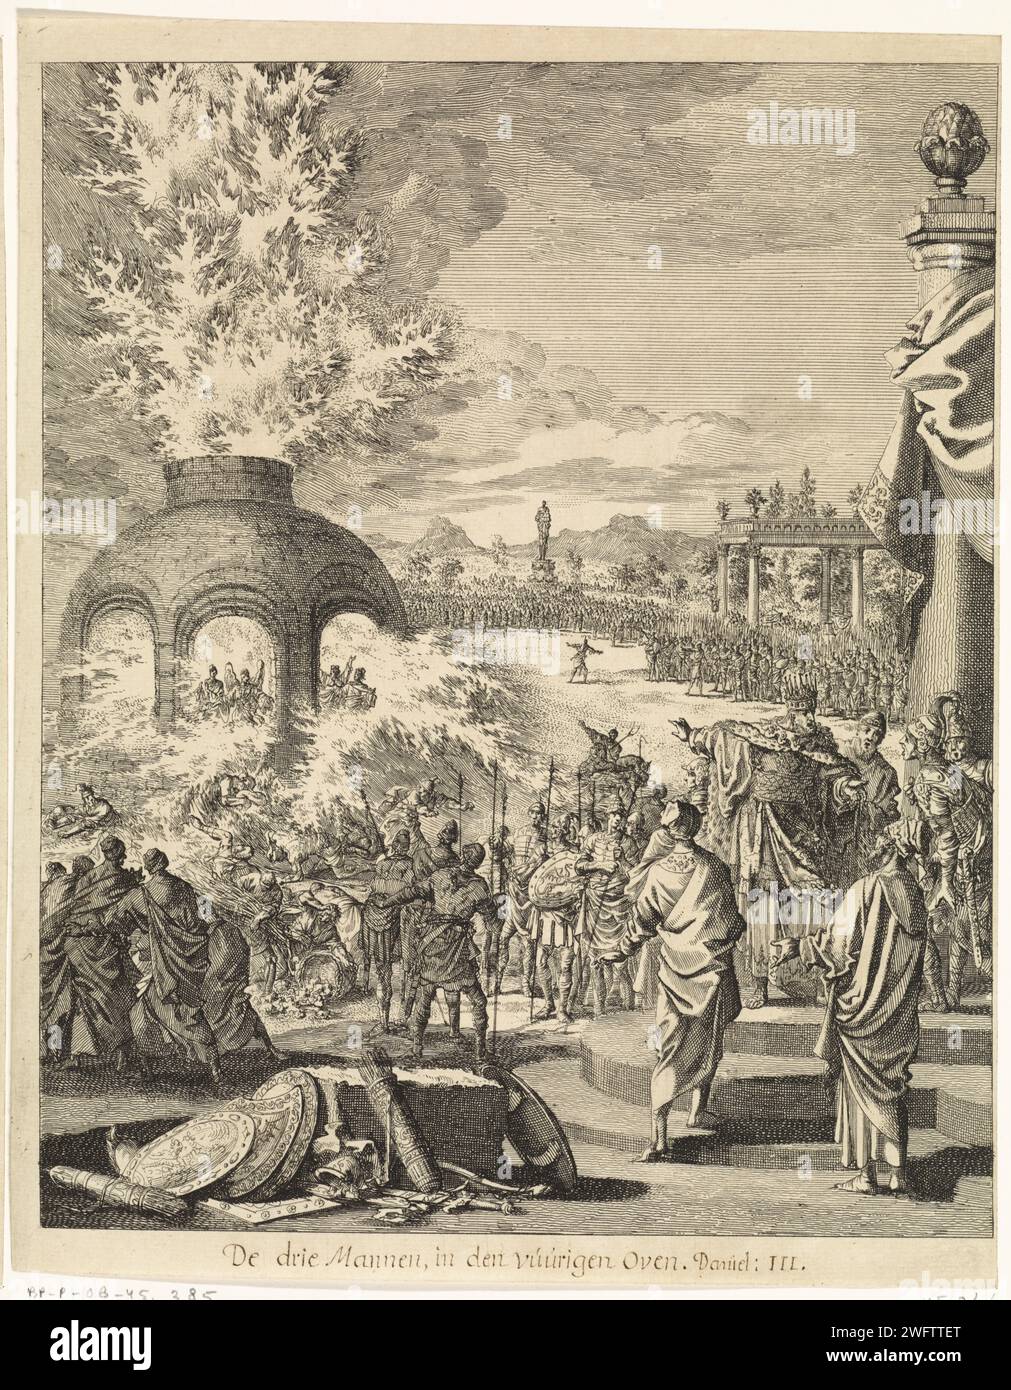 Nebuchadnezzar in wonder about the presence of three young people in the fiery oven, Jan Luyken, 1708 print  Amsterdam paper etching to his astonishment King Nebuchadnezzar sees four men (one of them usually represented as an angel) in the furnace; the king commands them to come forth Stock Photo